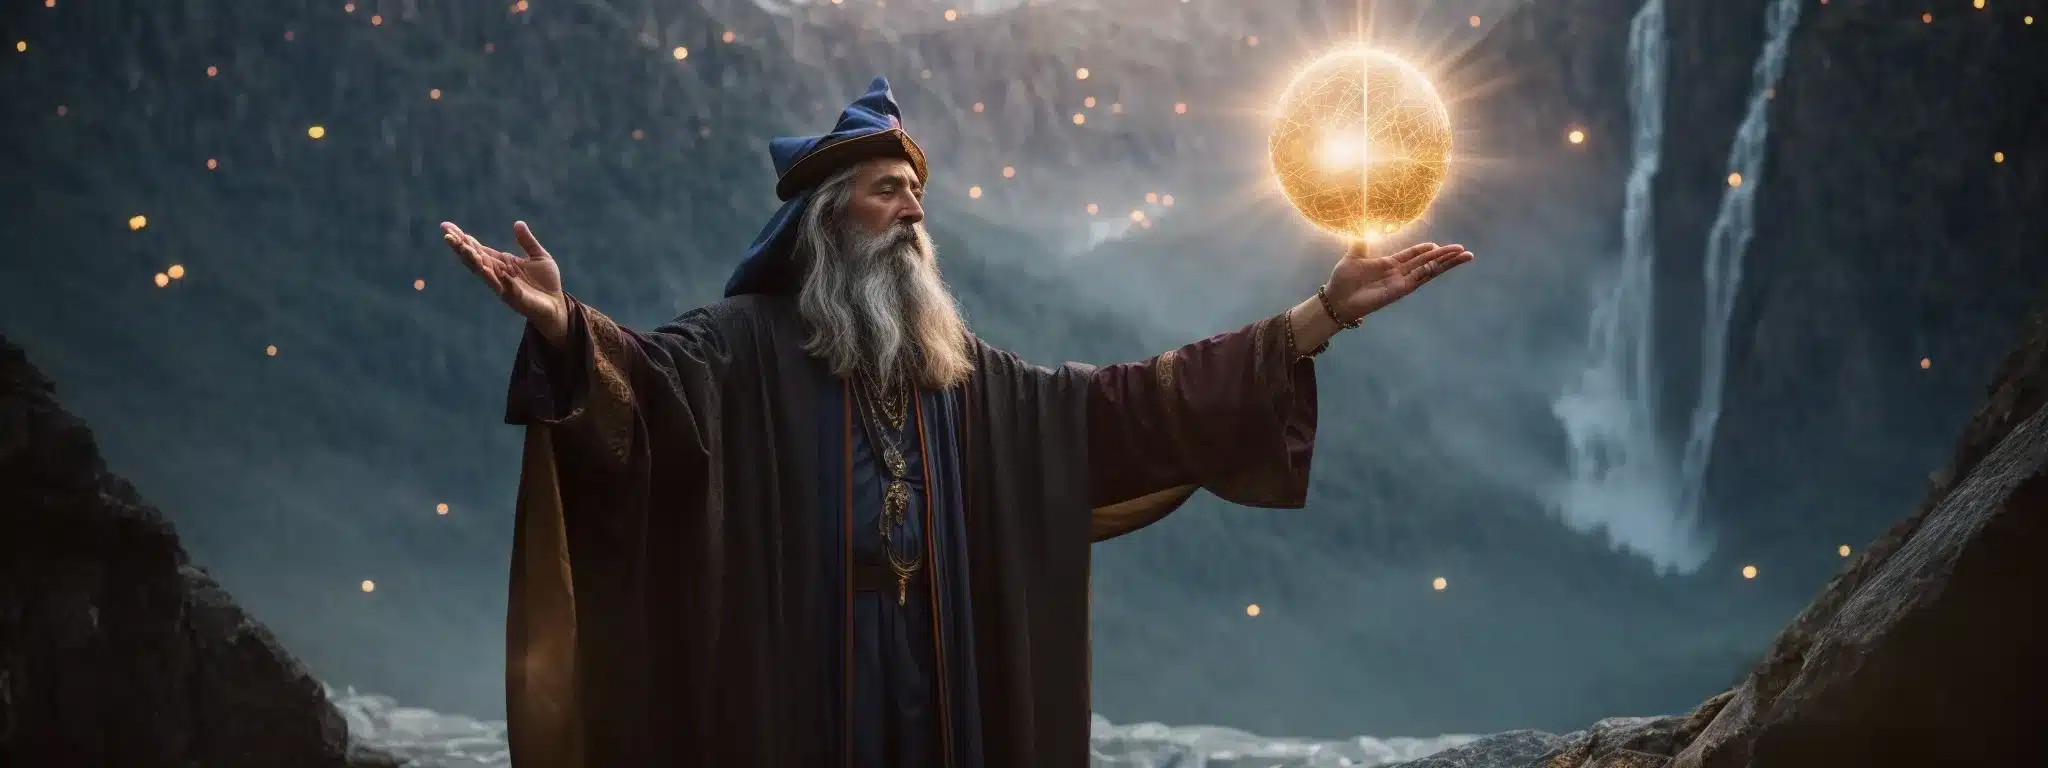 A Wizard With Outstretched Arms Conjures A Glowing Orb Symbolizing Creative Energy Over A Digital Landscape.